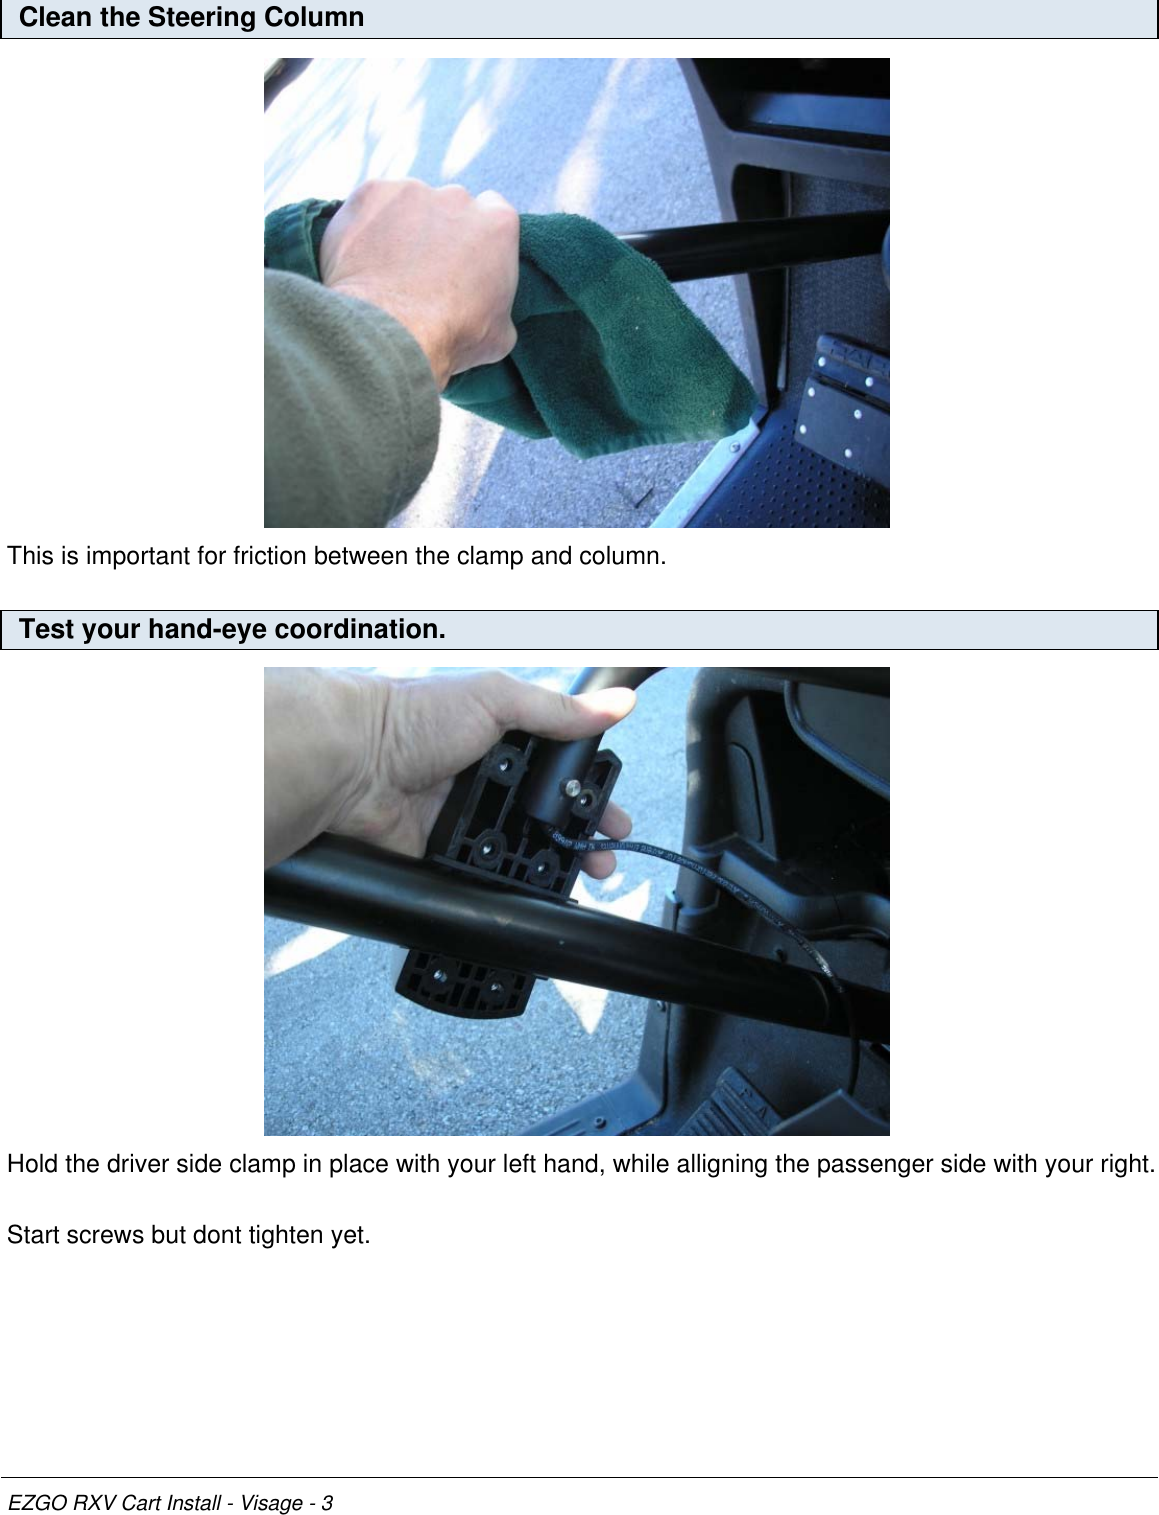 Clean the Steering ColumnThis is important for friction between the clamp and column.Test your hand-eye coordination.Hold the driver side clamp in place with your left hand, while alligning the passenger side with your right.Start screws but dont tighten yet.EZGO RXV Cart Install - Visage - 3